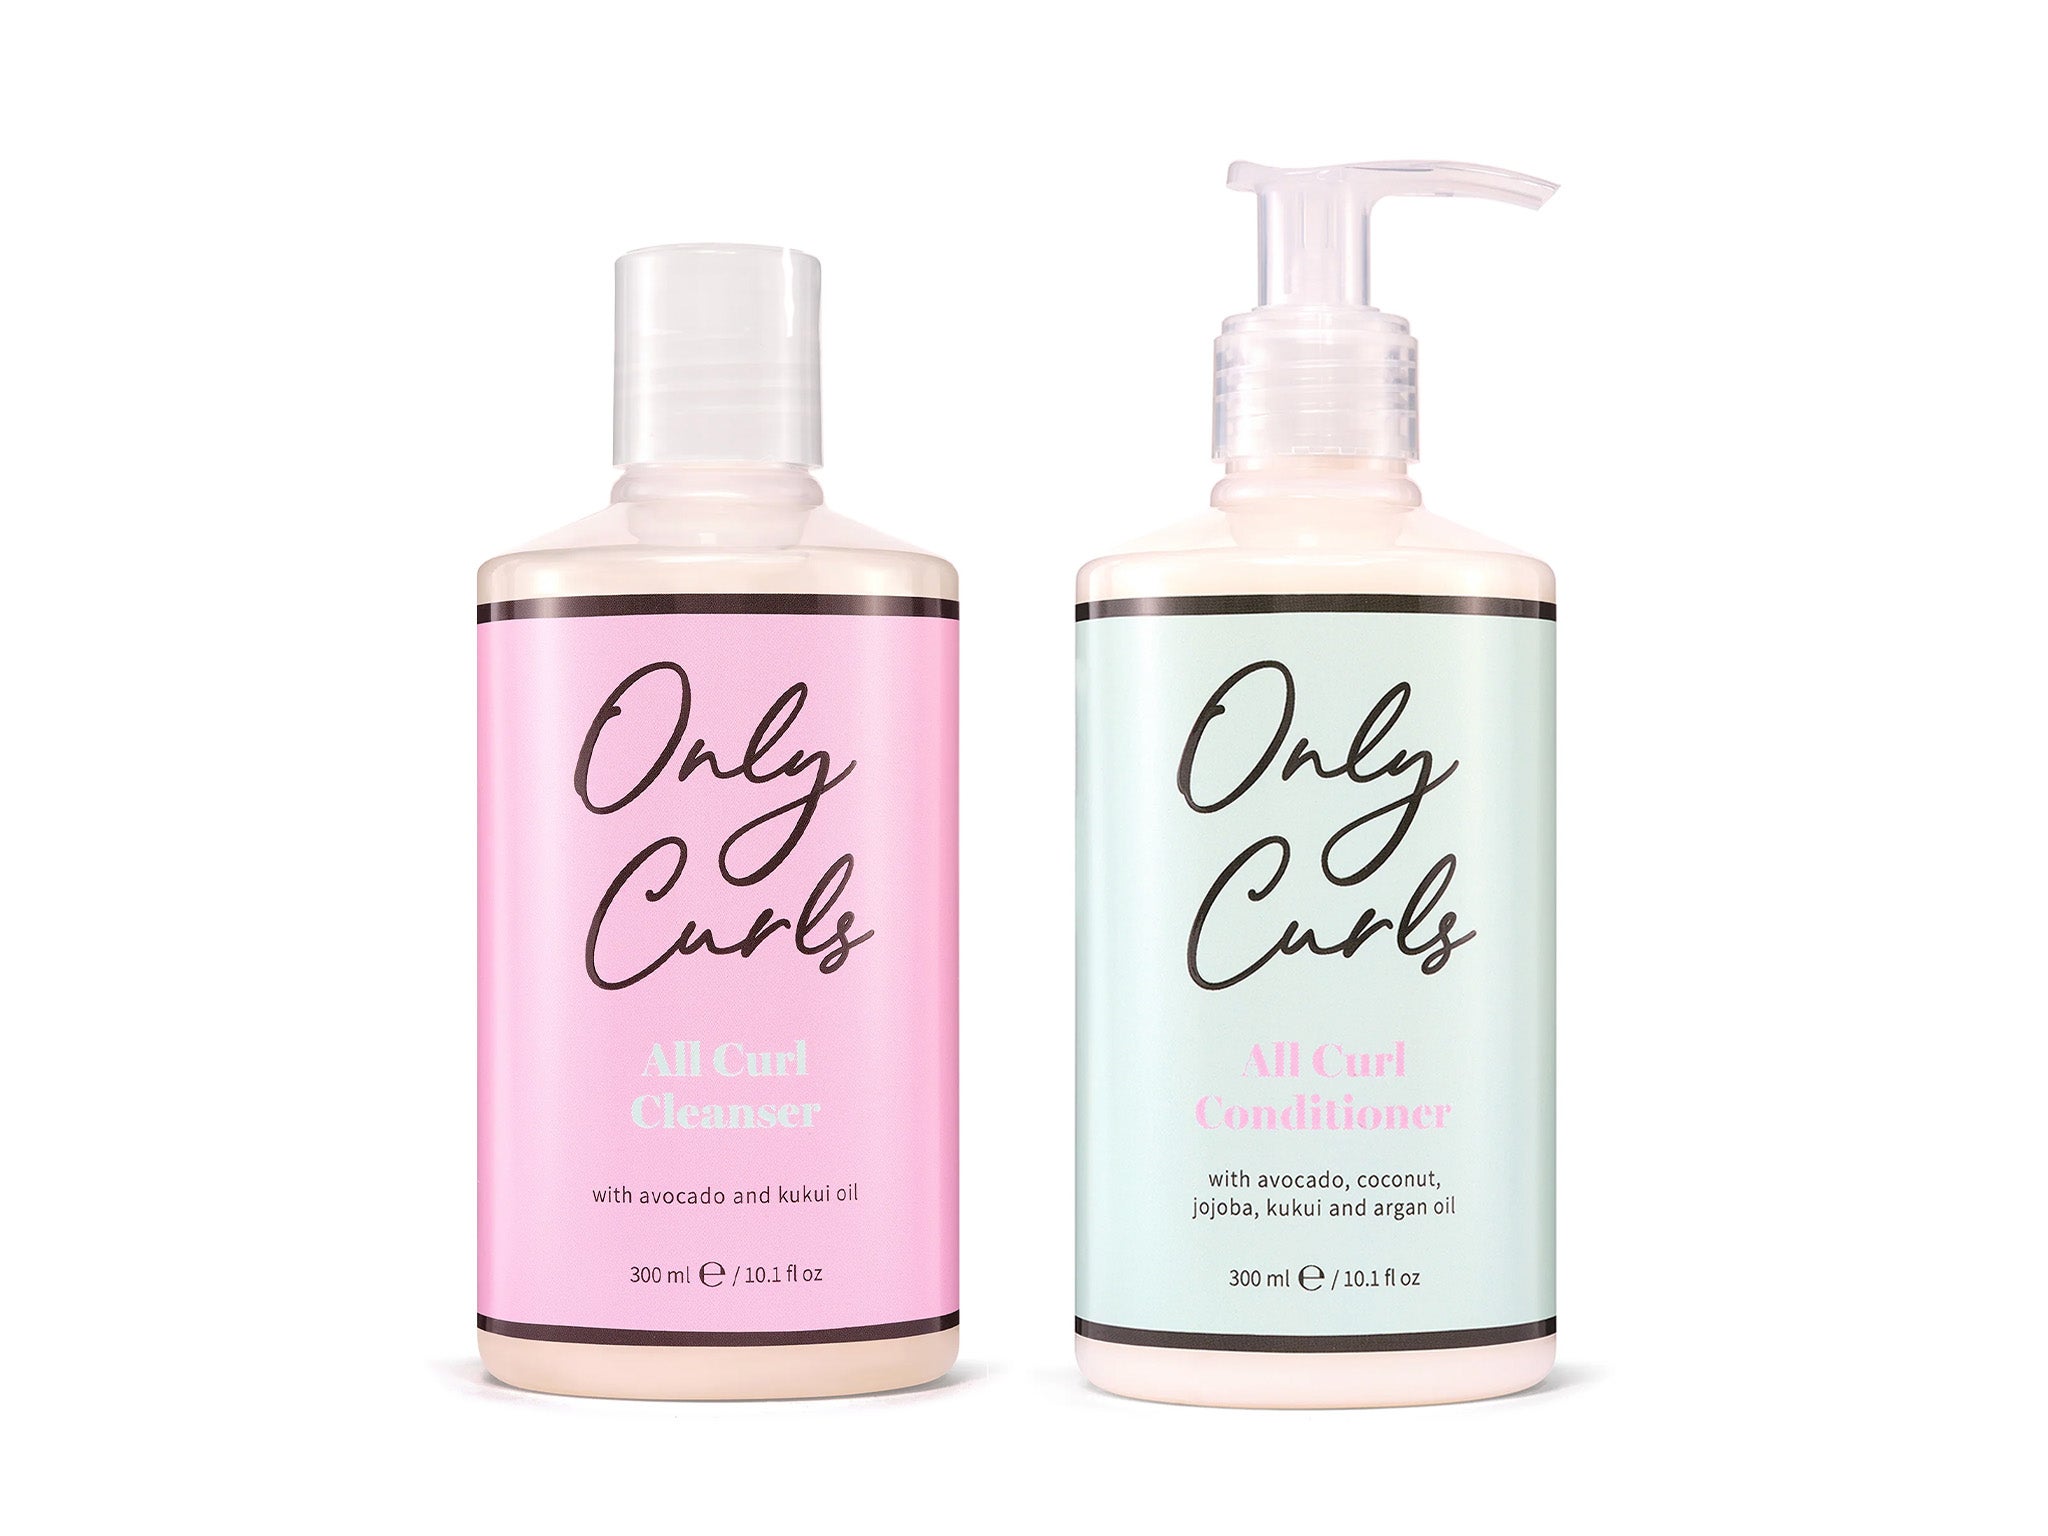 Only Curls all curl cleanser and all curl conditioner